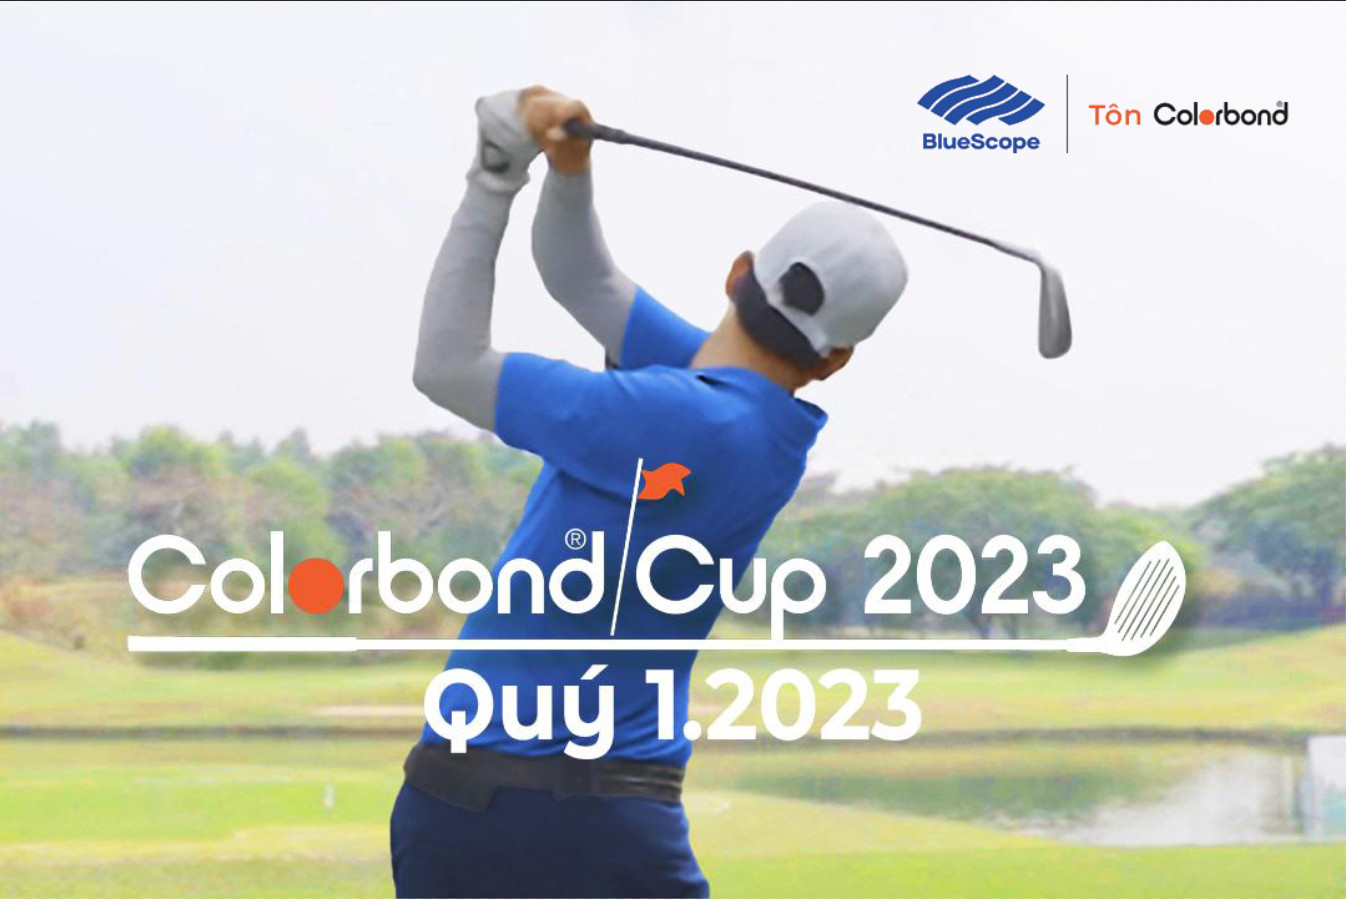 COLORBOND® ️CUP – WHEN ‘CONNECTING’ IS GETTING BEYOND ‘MEETING’